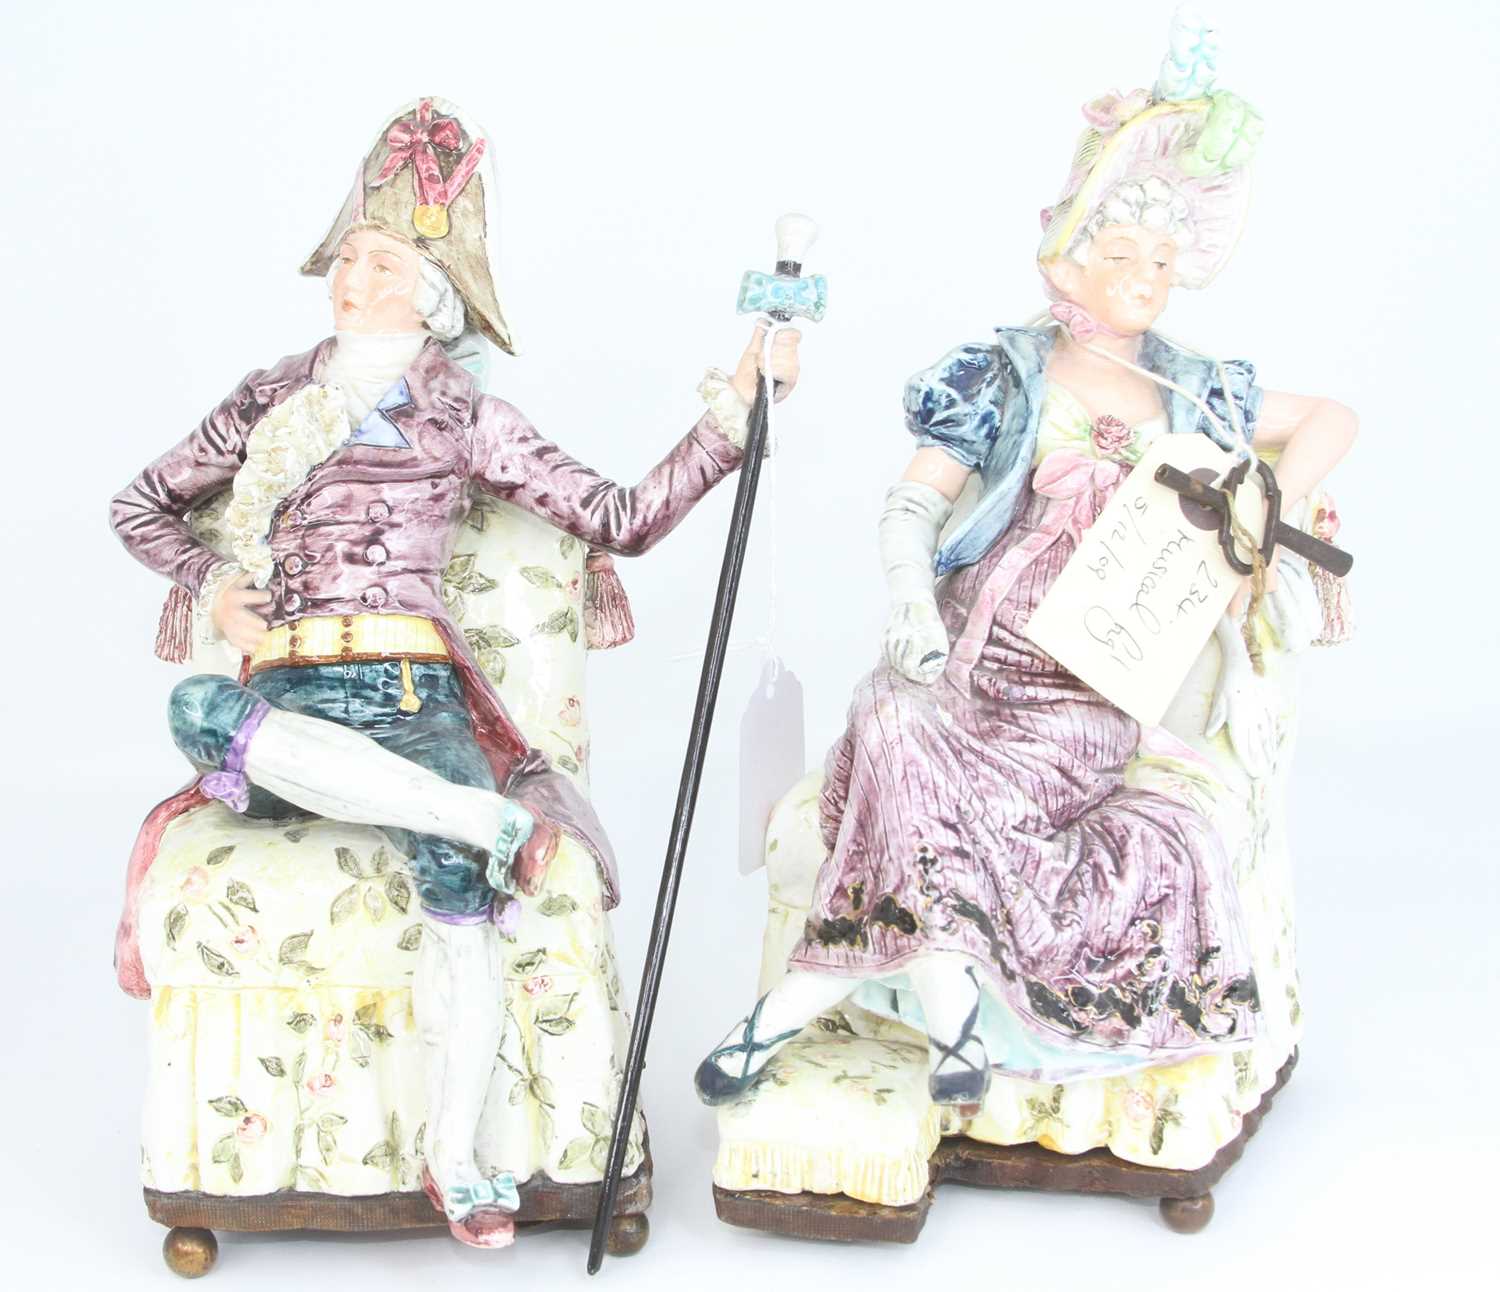 A pair of continental pottery figures, each shown reclining in 18th century dress, largest height